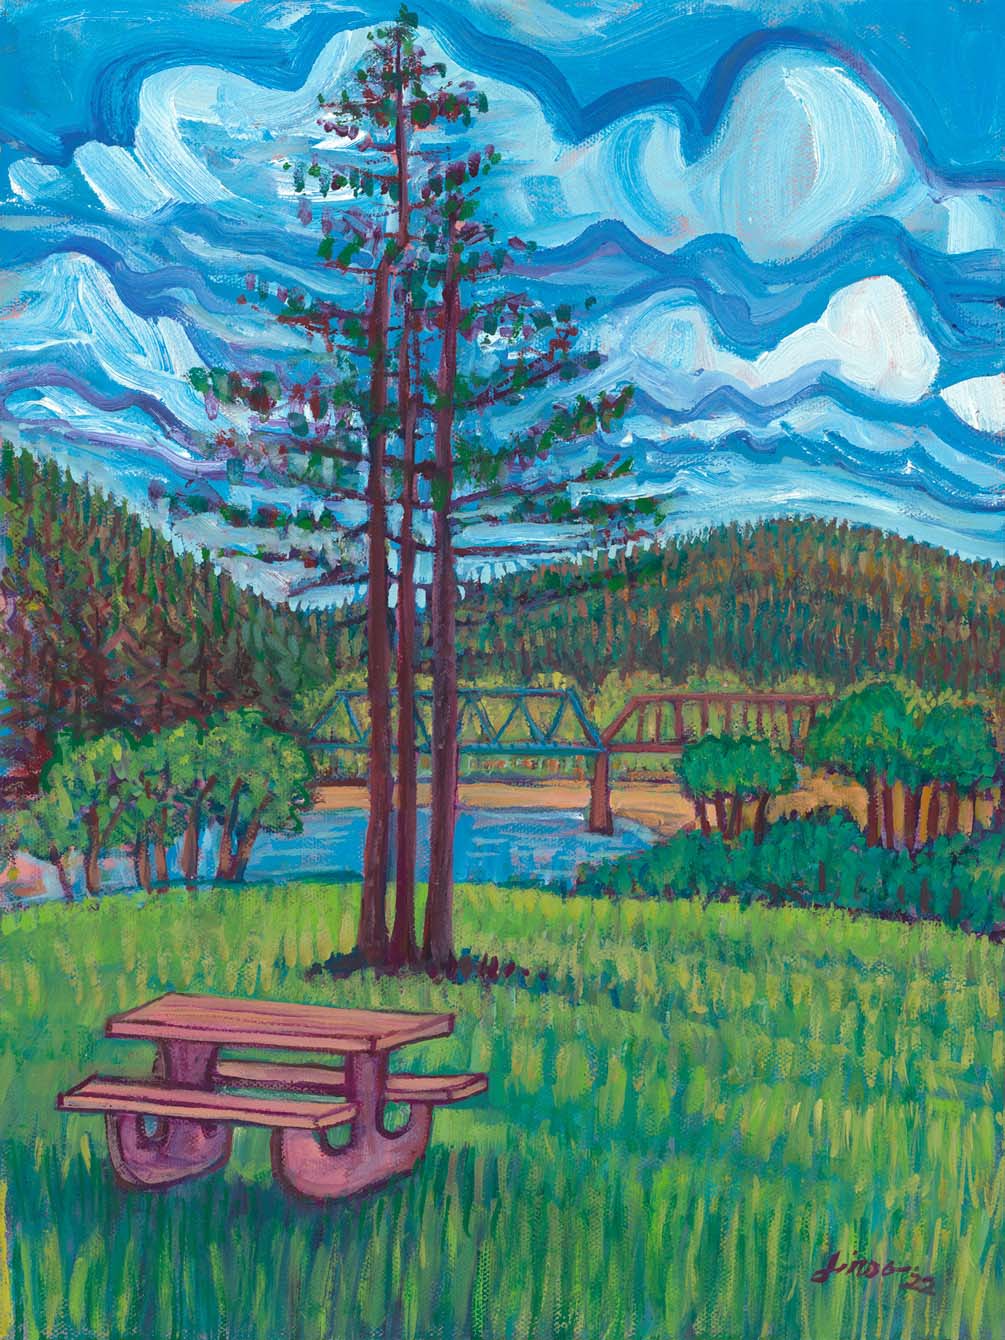 oil painting - Avenue of the Giants: two redwood trees in a field with a picnic table in the foreground and train tressel bridget over water with hills in the background